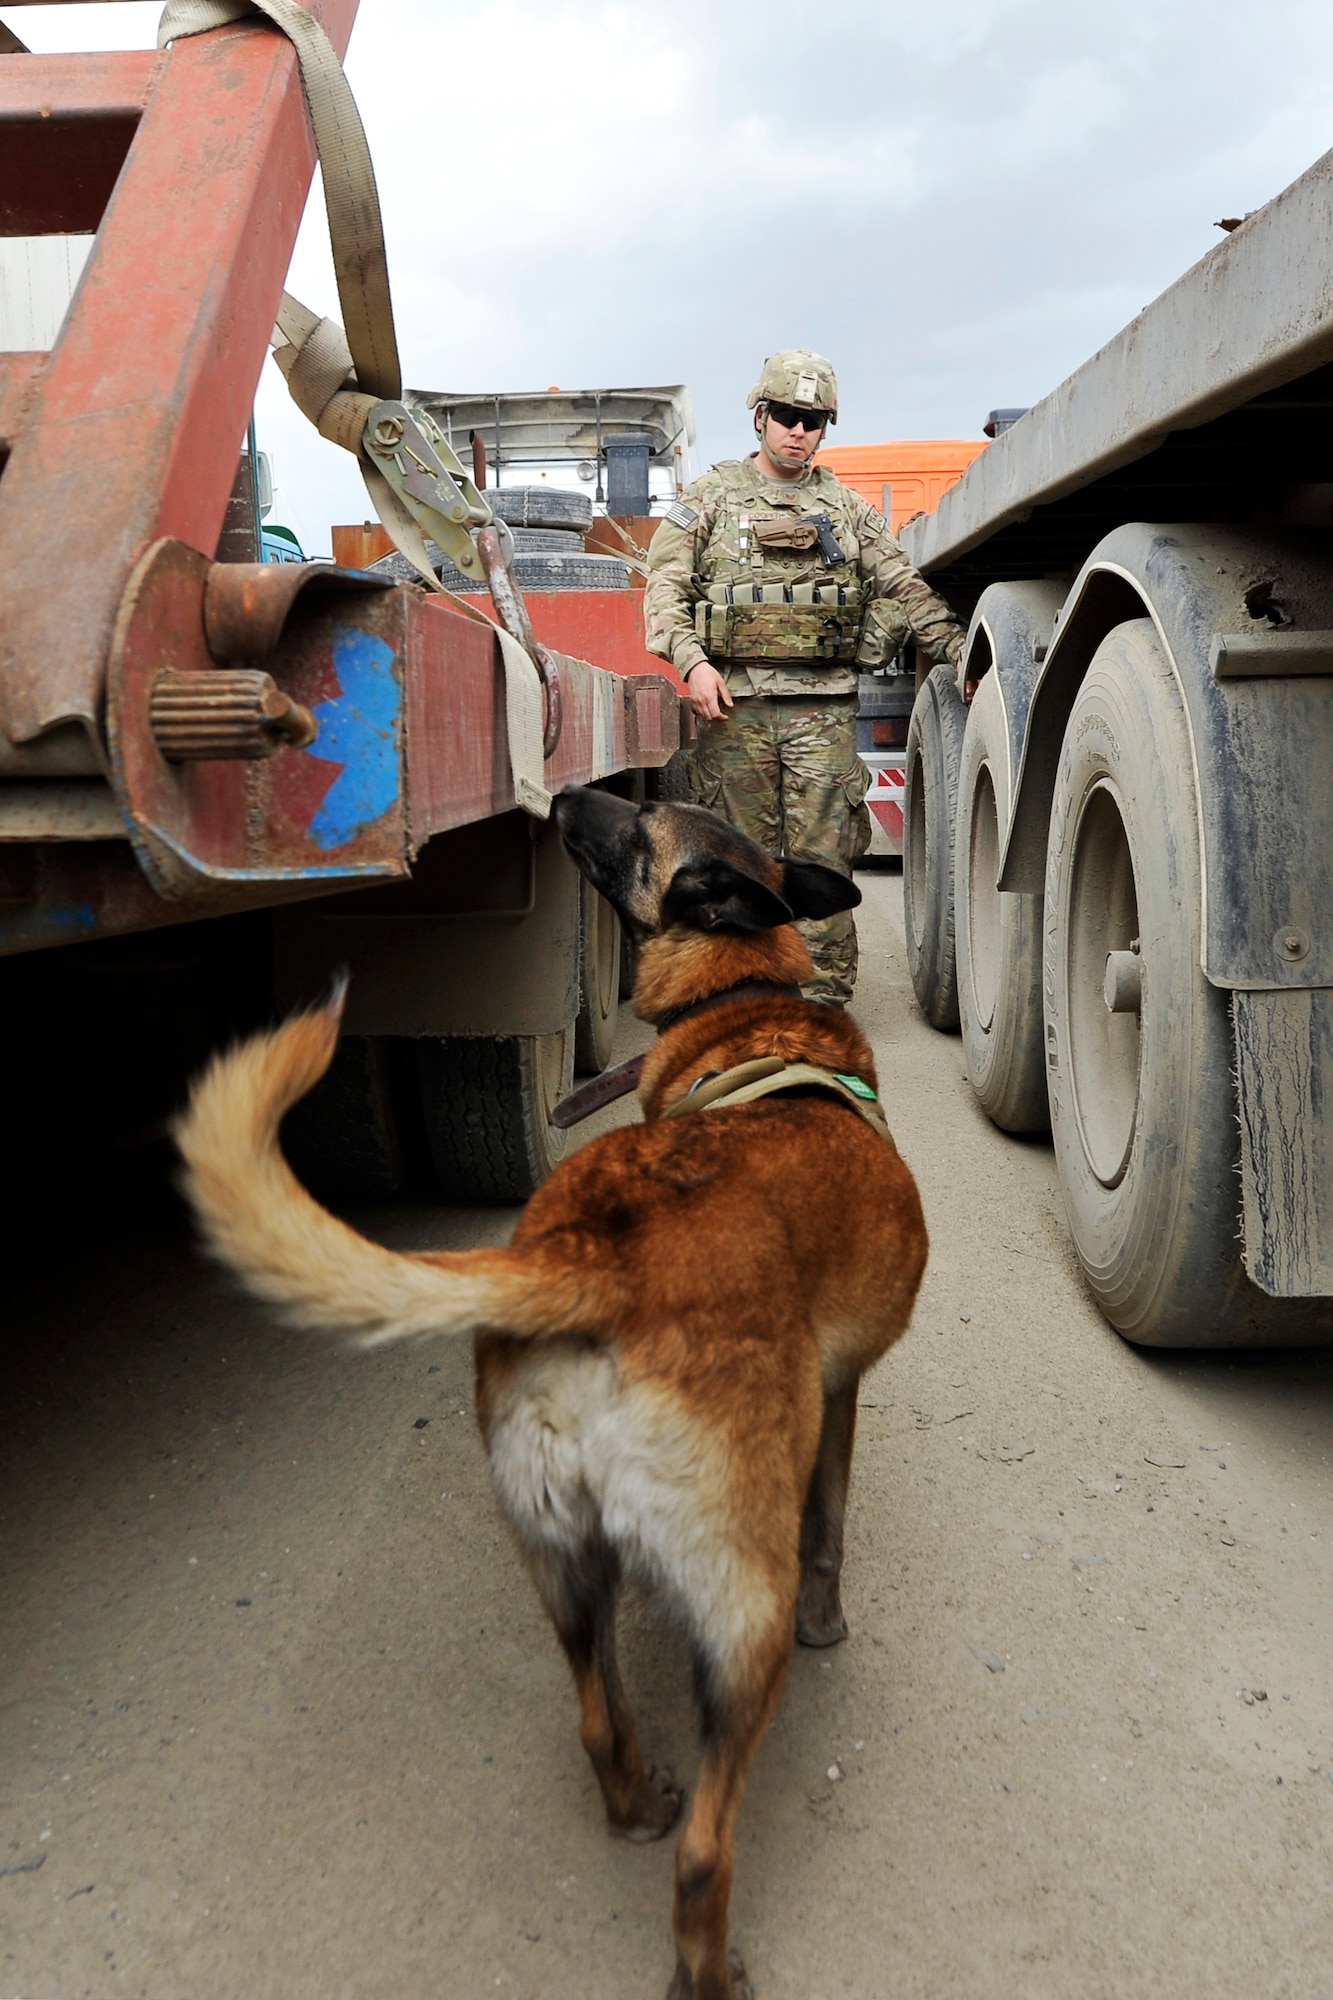 Staff Sgt. Jonathan Cooper, 455th Expeditionary Security Forces Group Military Working Dog handler, and his dog Astra search for Vehicle-Borne Improvised Explosive Devices at Bagram Airfield, Afghanistan, April 29, 2013. Vehicles come from all over Afghanistan and must be searched for VBIED threats before they can enter the installation. (U.S. Air Force photo/Senior Airman Chris Willis)